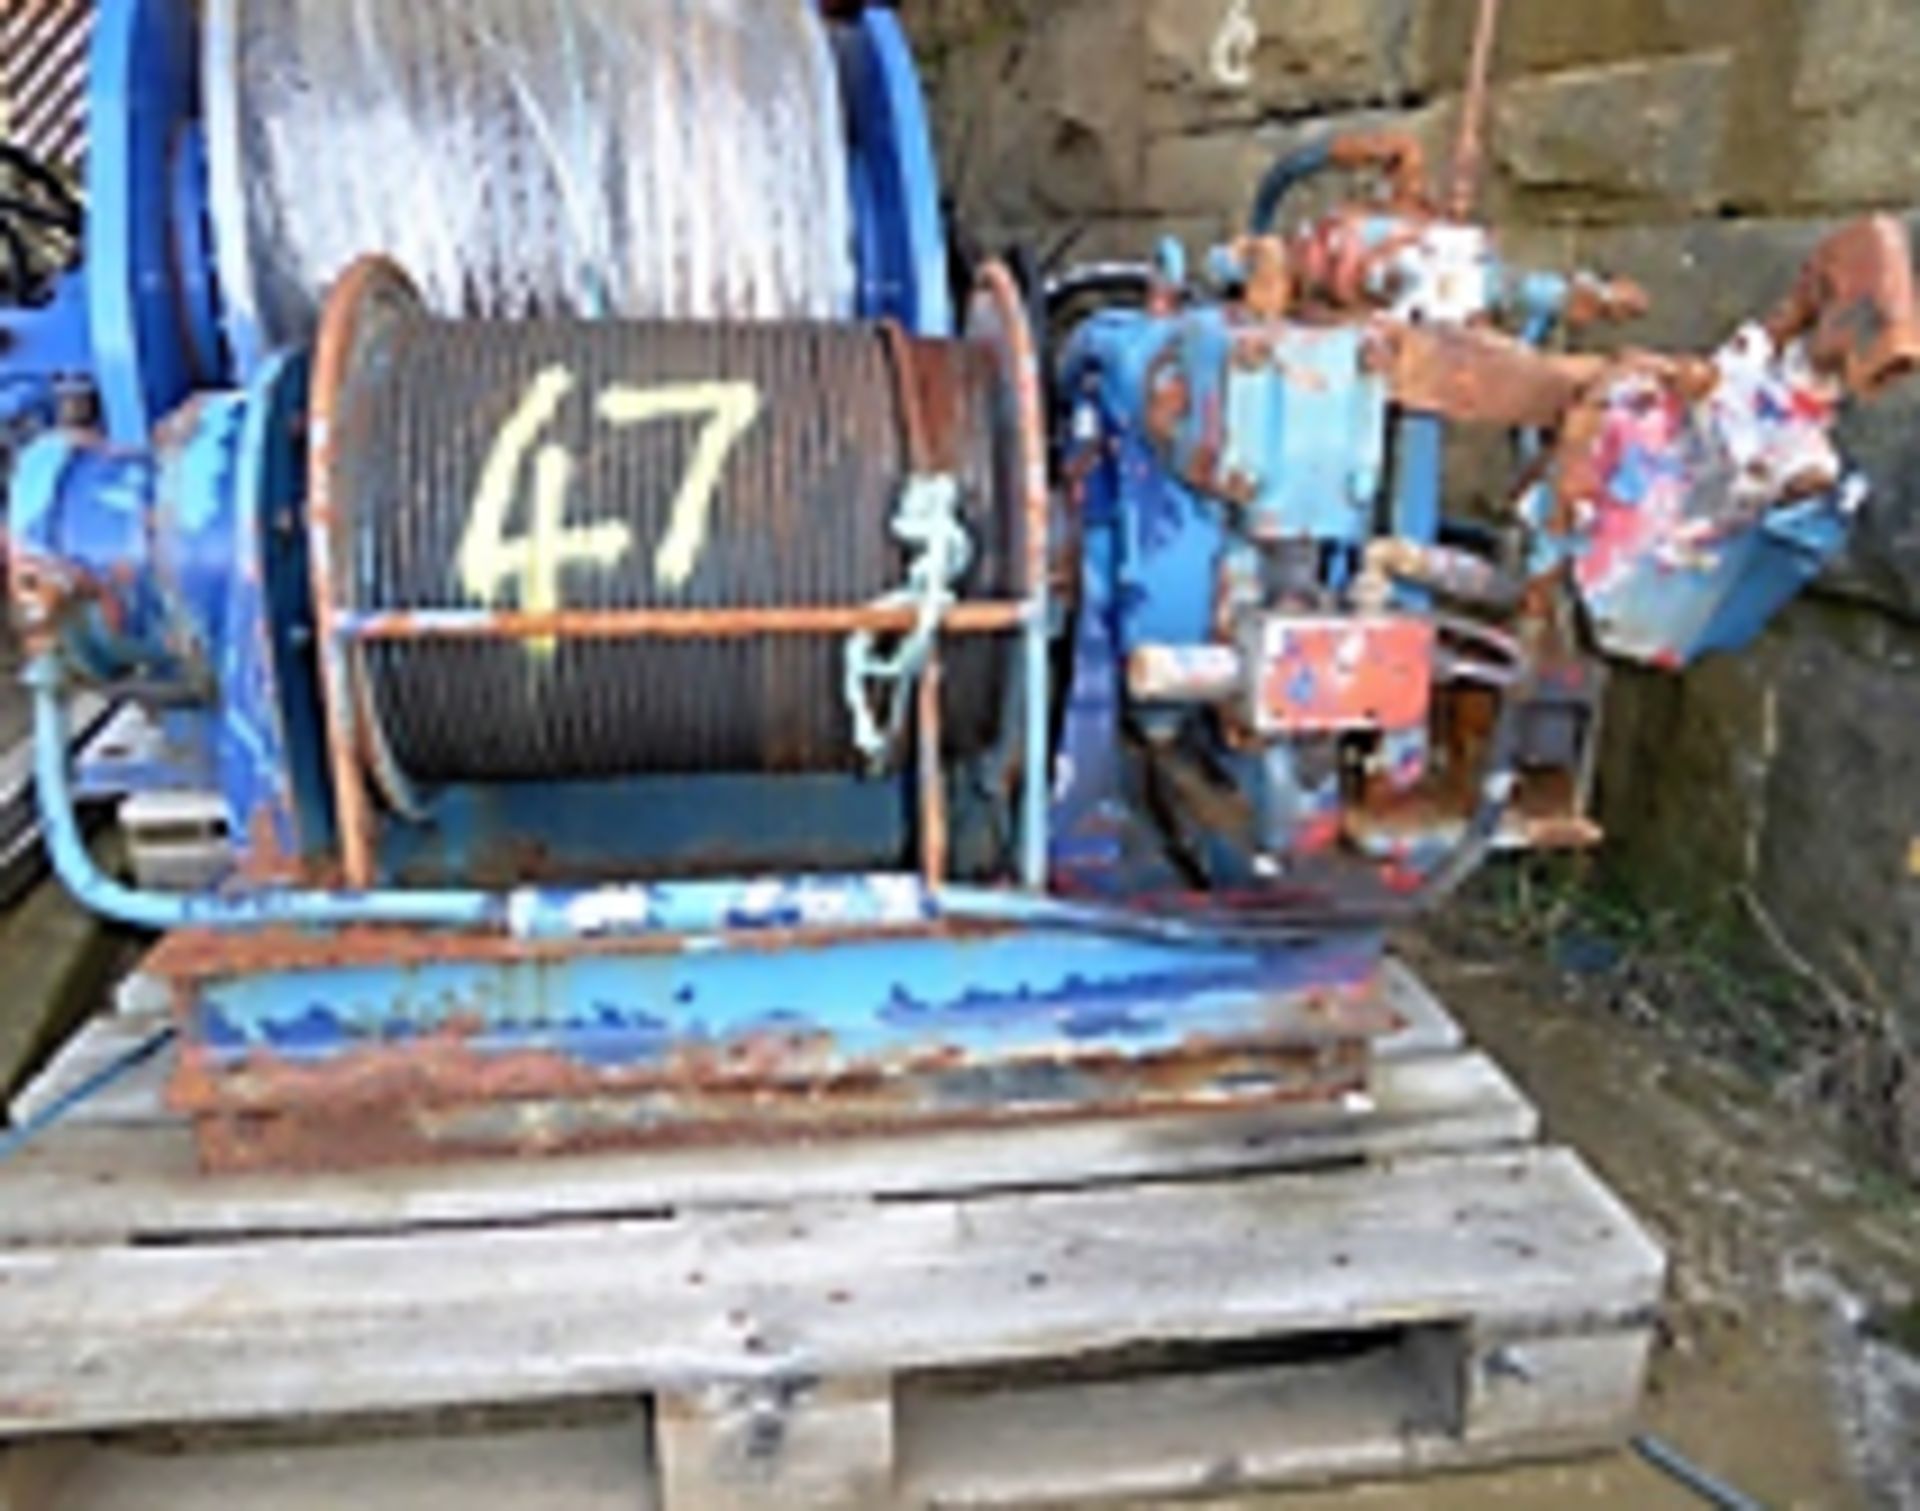 NIMM hydraulic man riding winch -SWL - 500kg, Reasonable condition. Location - North Yard (top road) - Image 2 of 2